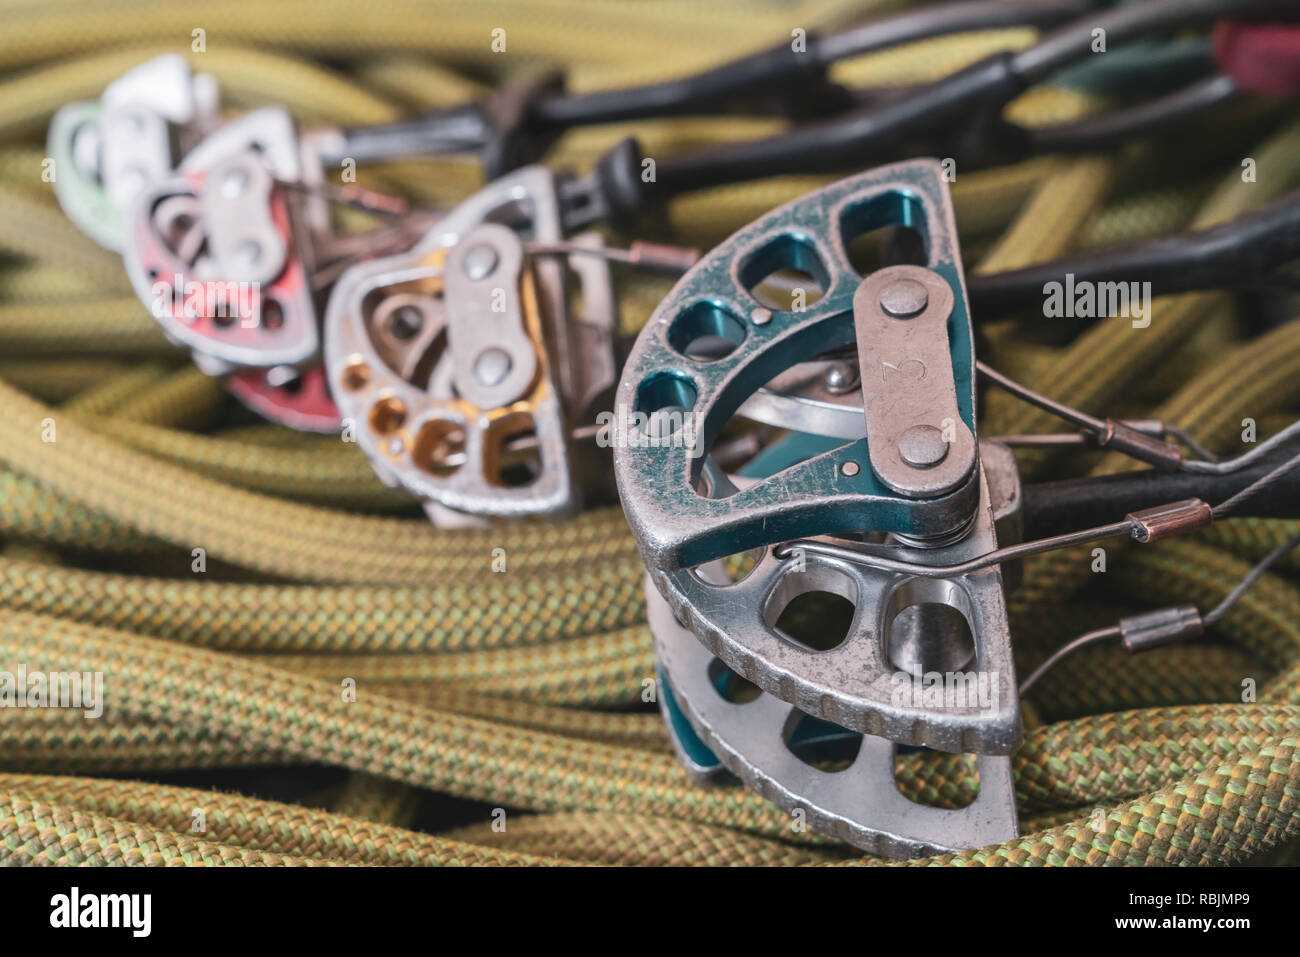 https://c8.alamy.com/comp/RBJMP9/traditional-rock-climbing-gear-cams-stoppers-rope-quickdraws-and-shoes-RBJMP9.jpg